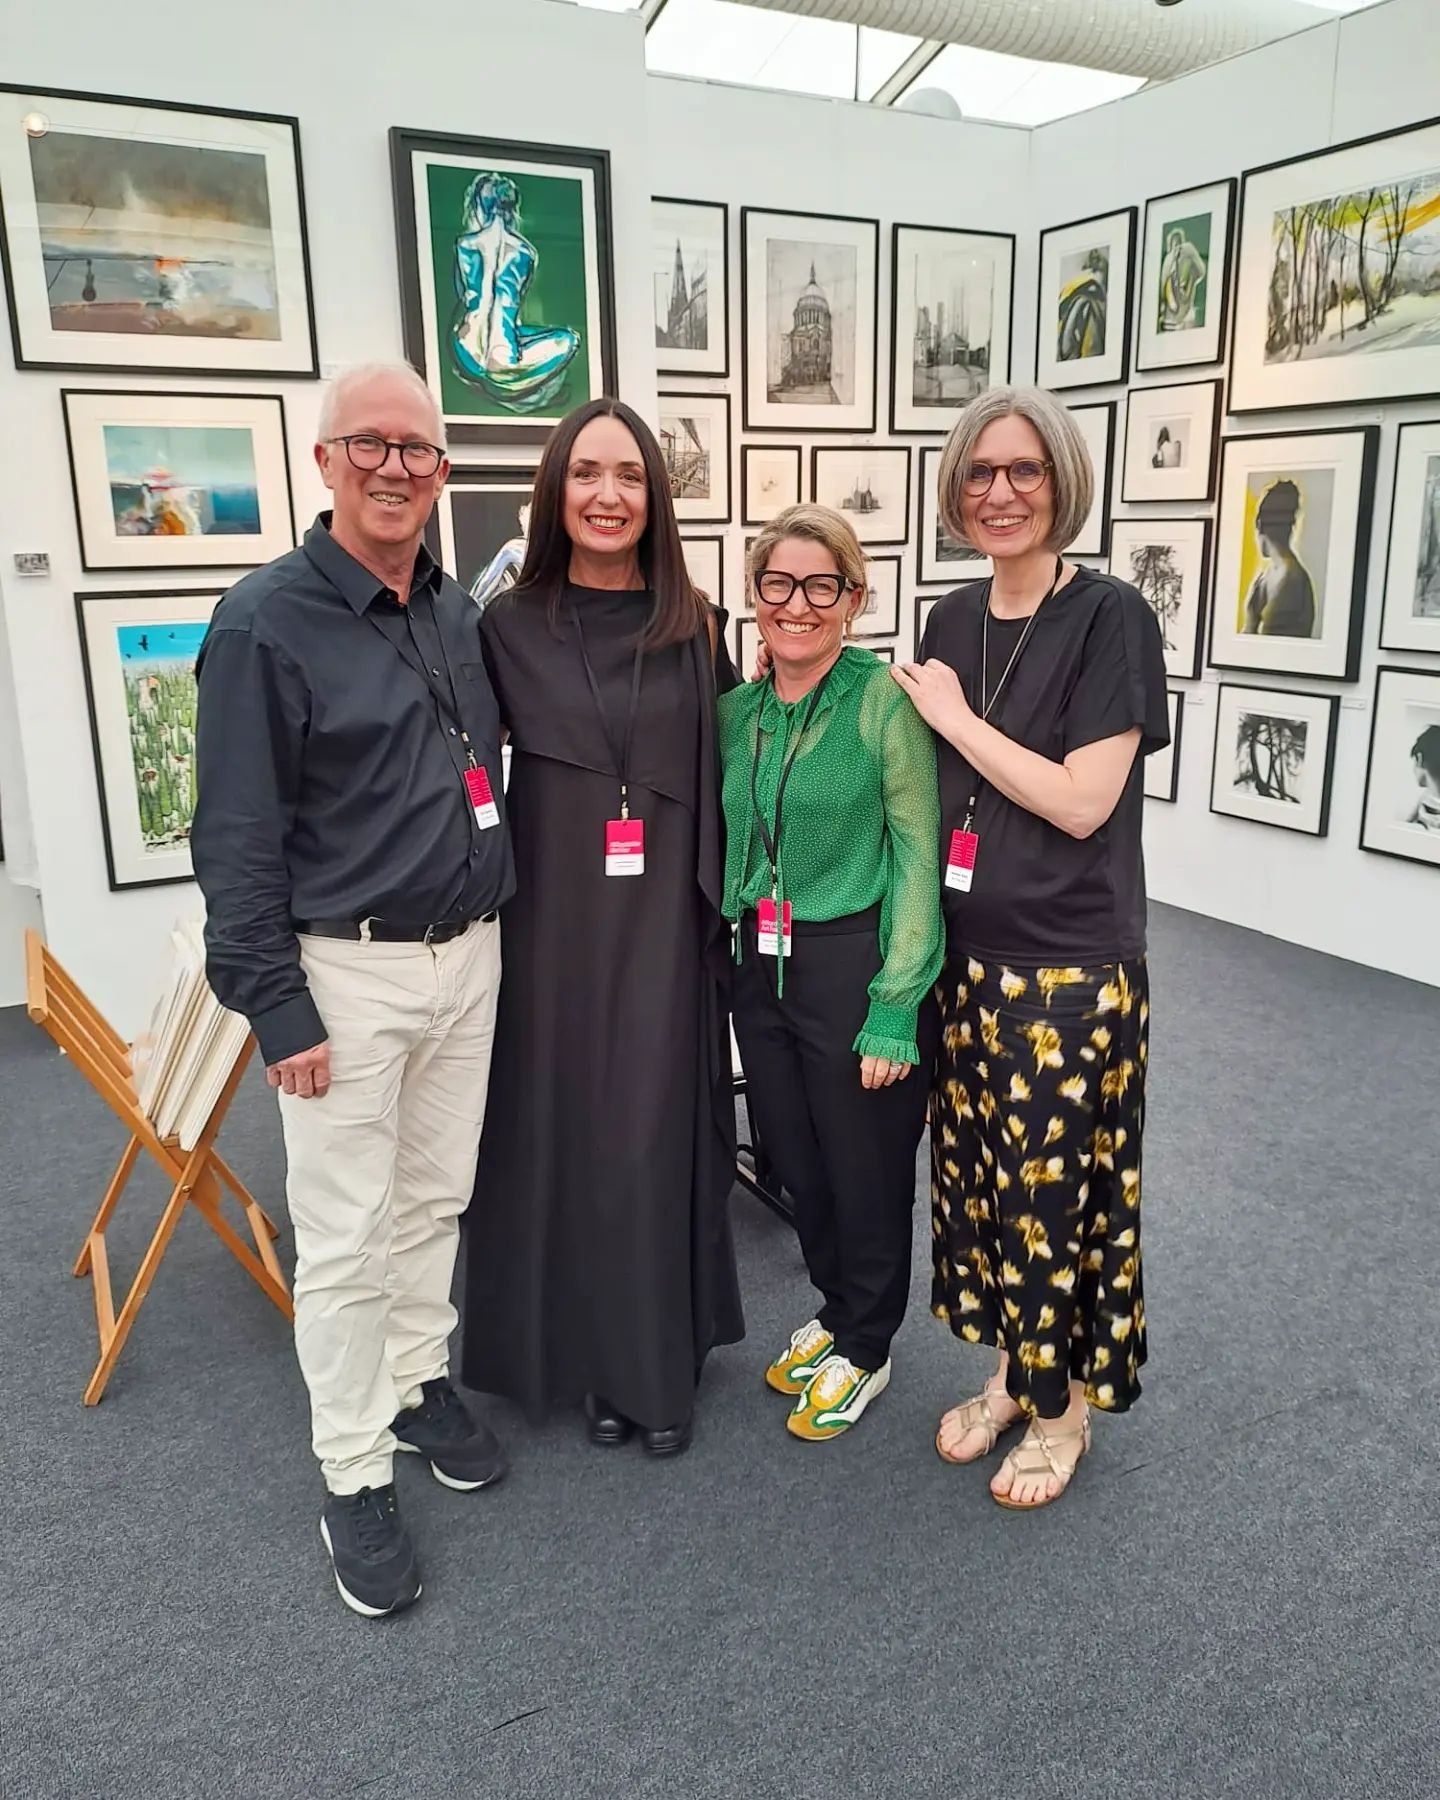 Calm before the opening @affordableartfairuk 
Now open until 9pm this evening and this weekend from 11am til 6pm.

I'm showing with @timsouthallart @melaniebellisartist and @tammymackayart on Stand D8

Do message me if you would like tickets to visit